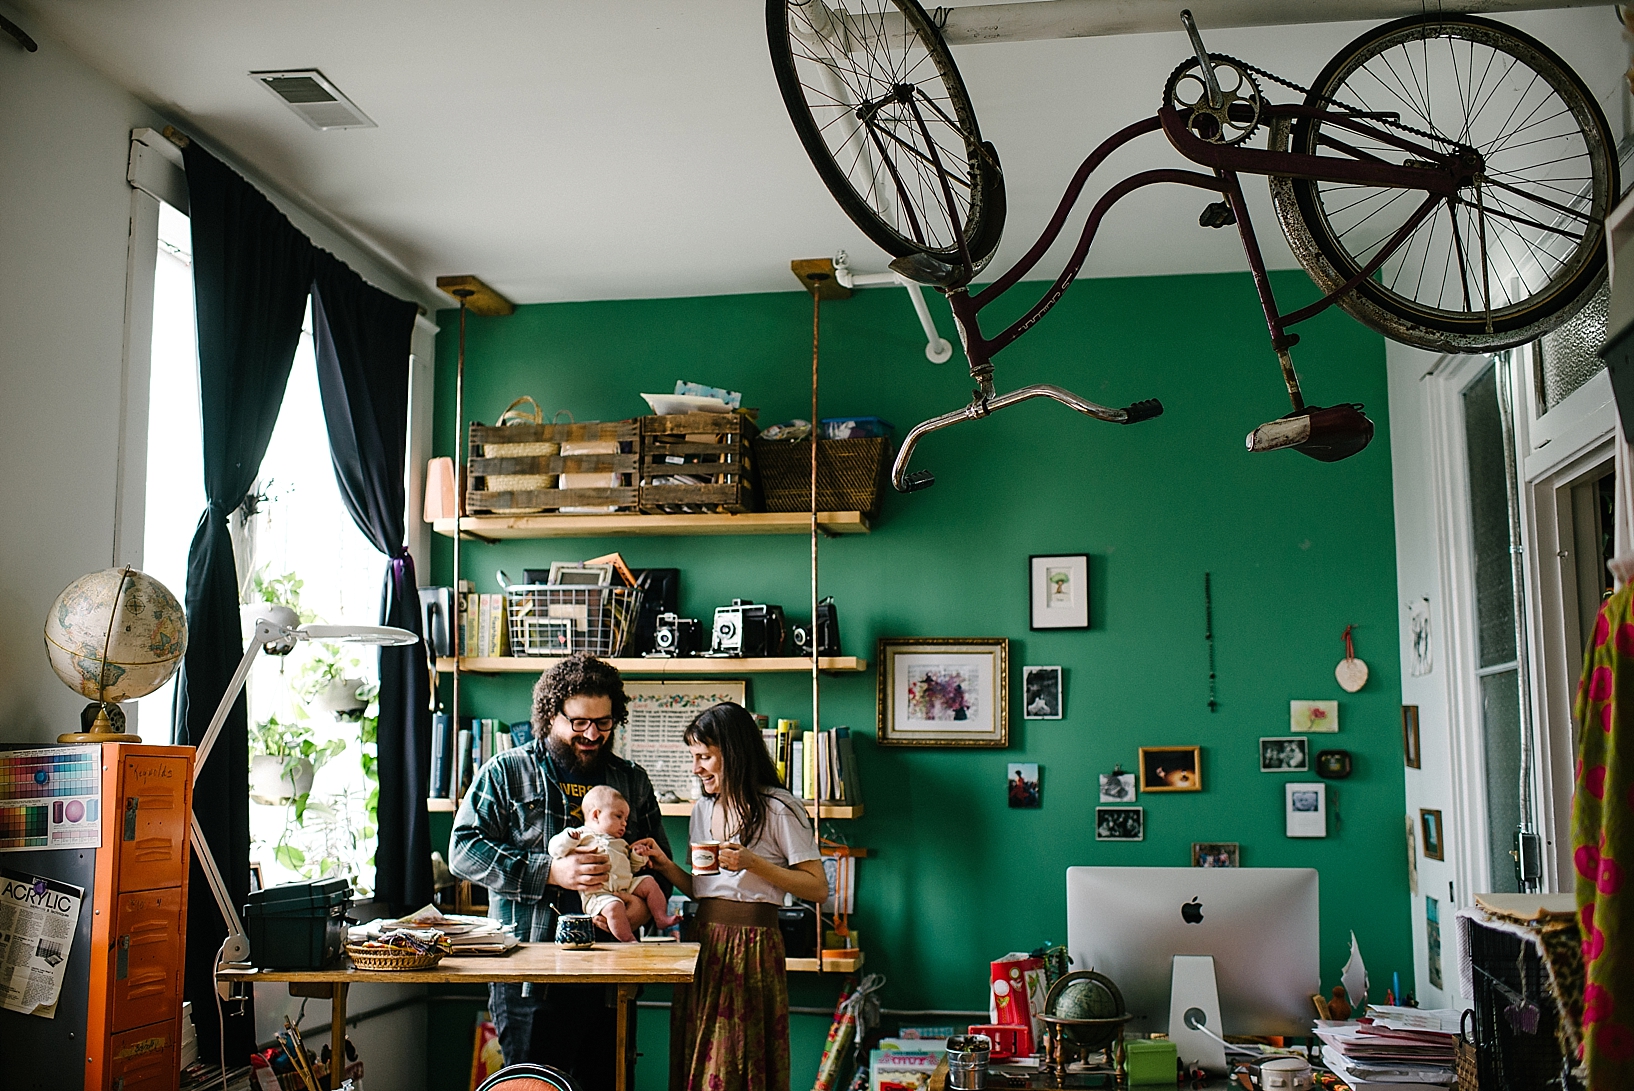 bohemian couple holding baby standing at home studio desk with bike suspended from ceiling